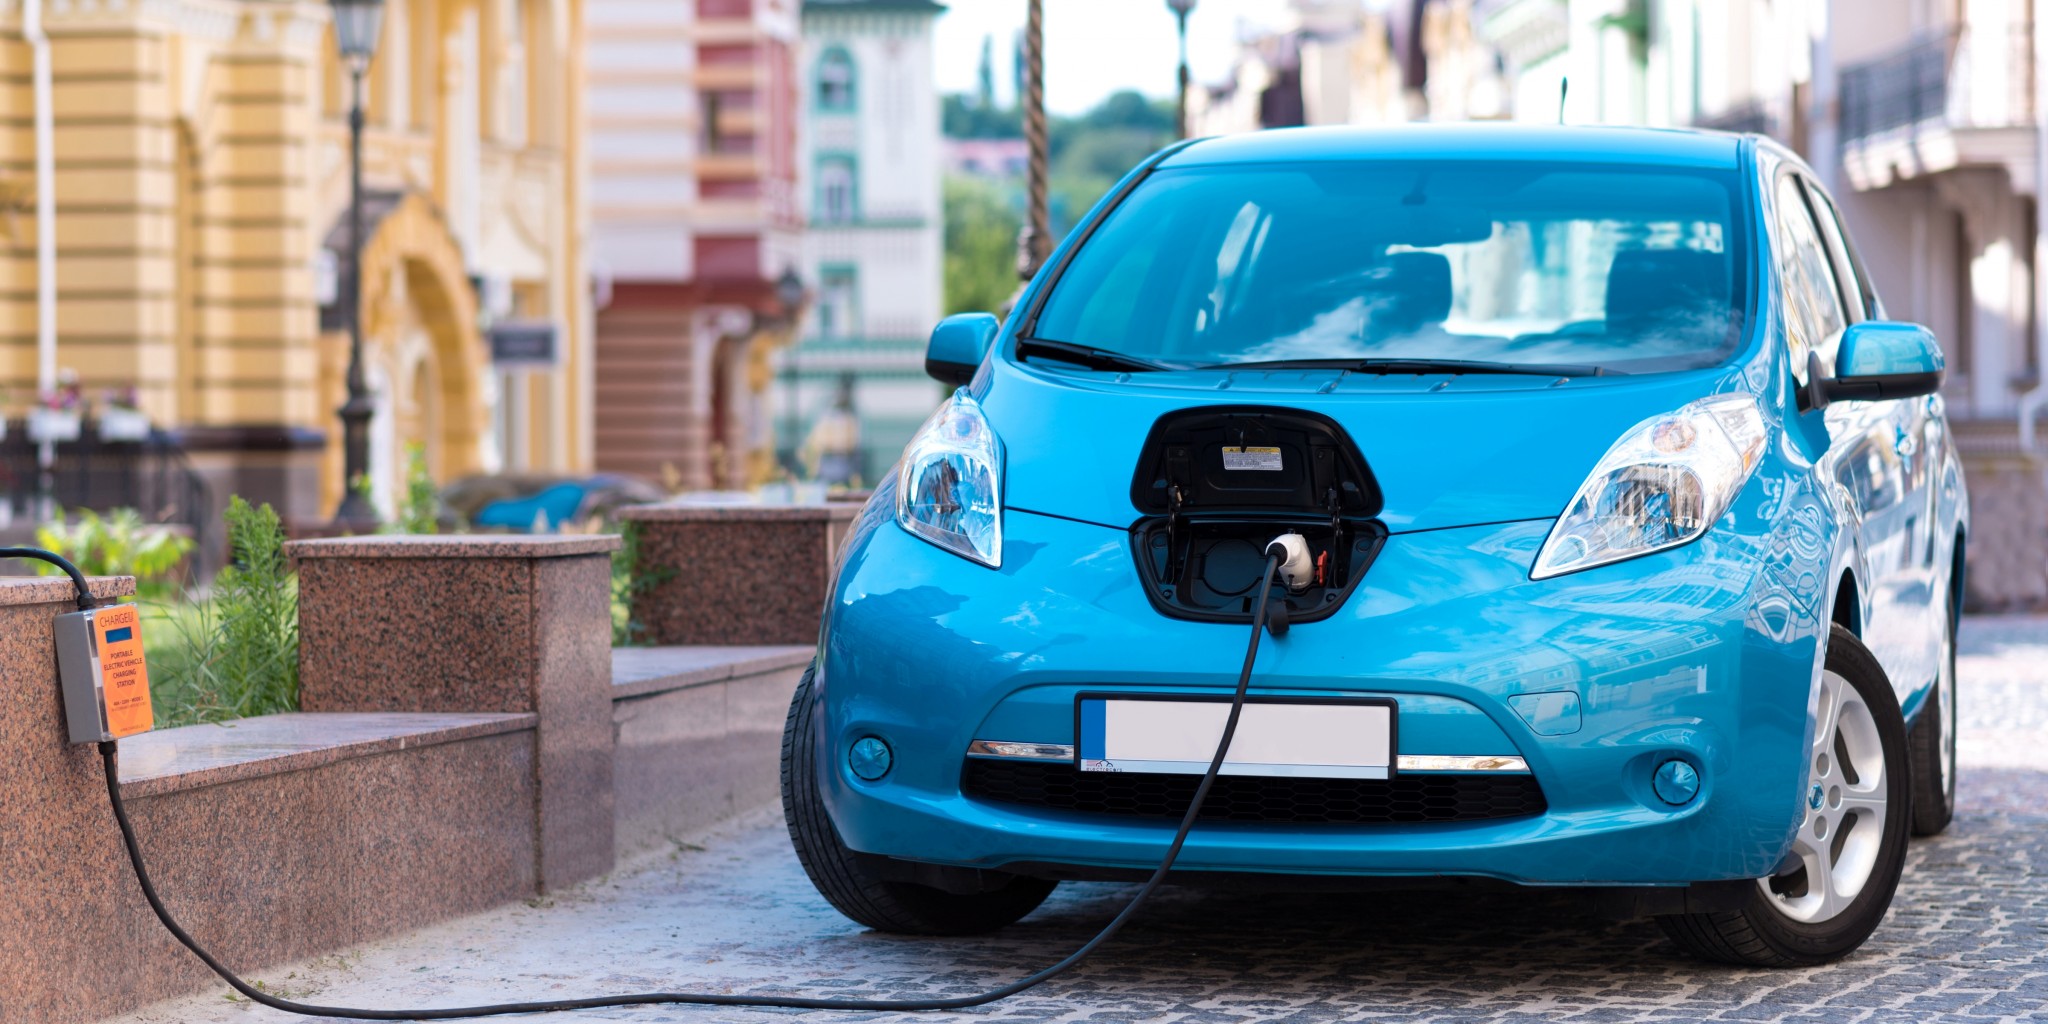 Ukraine may be on the doorstep of an electro cars revolution